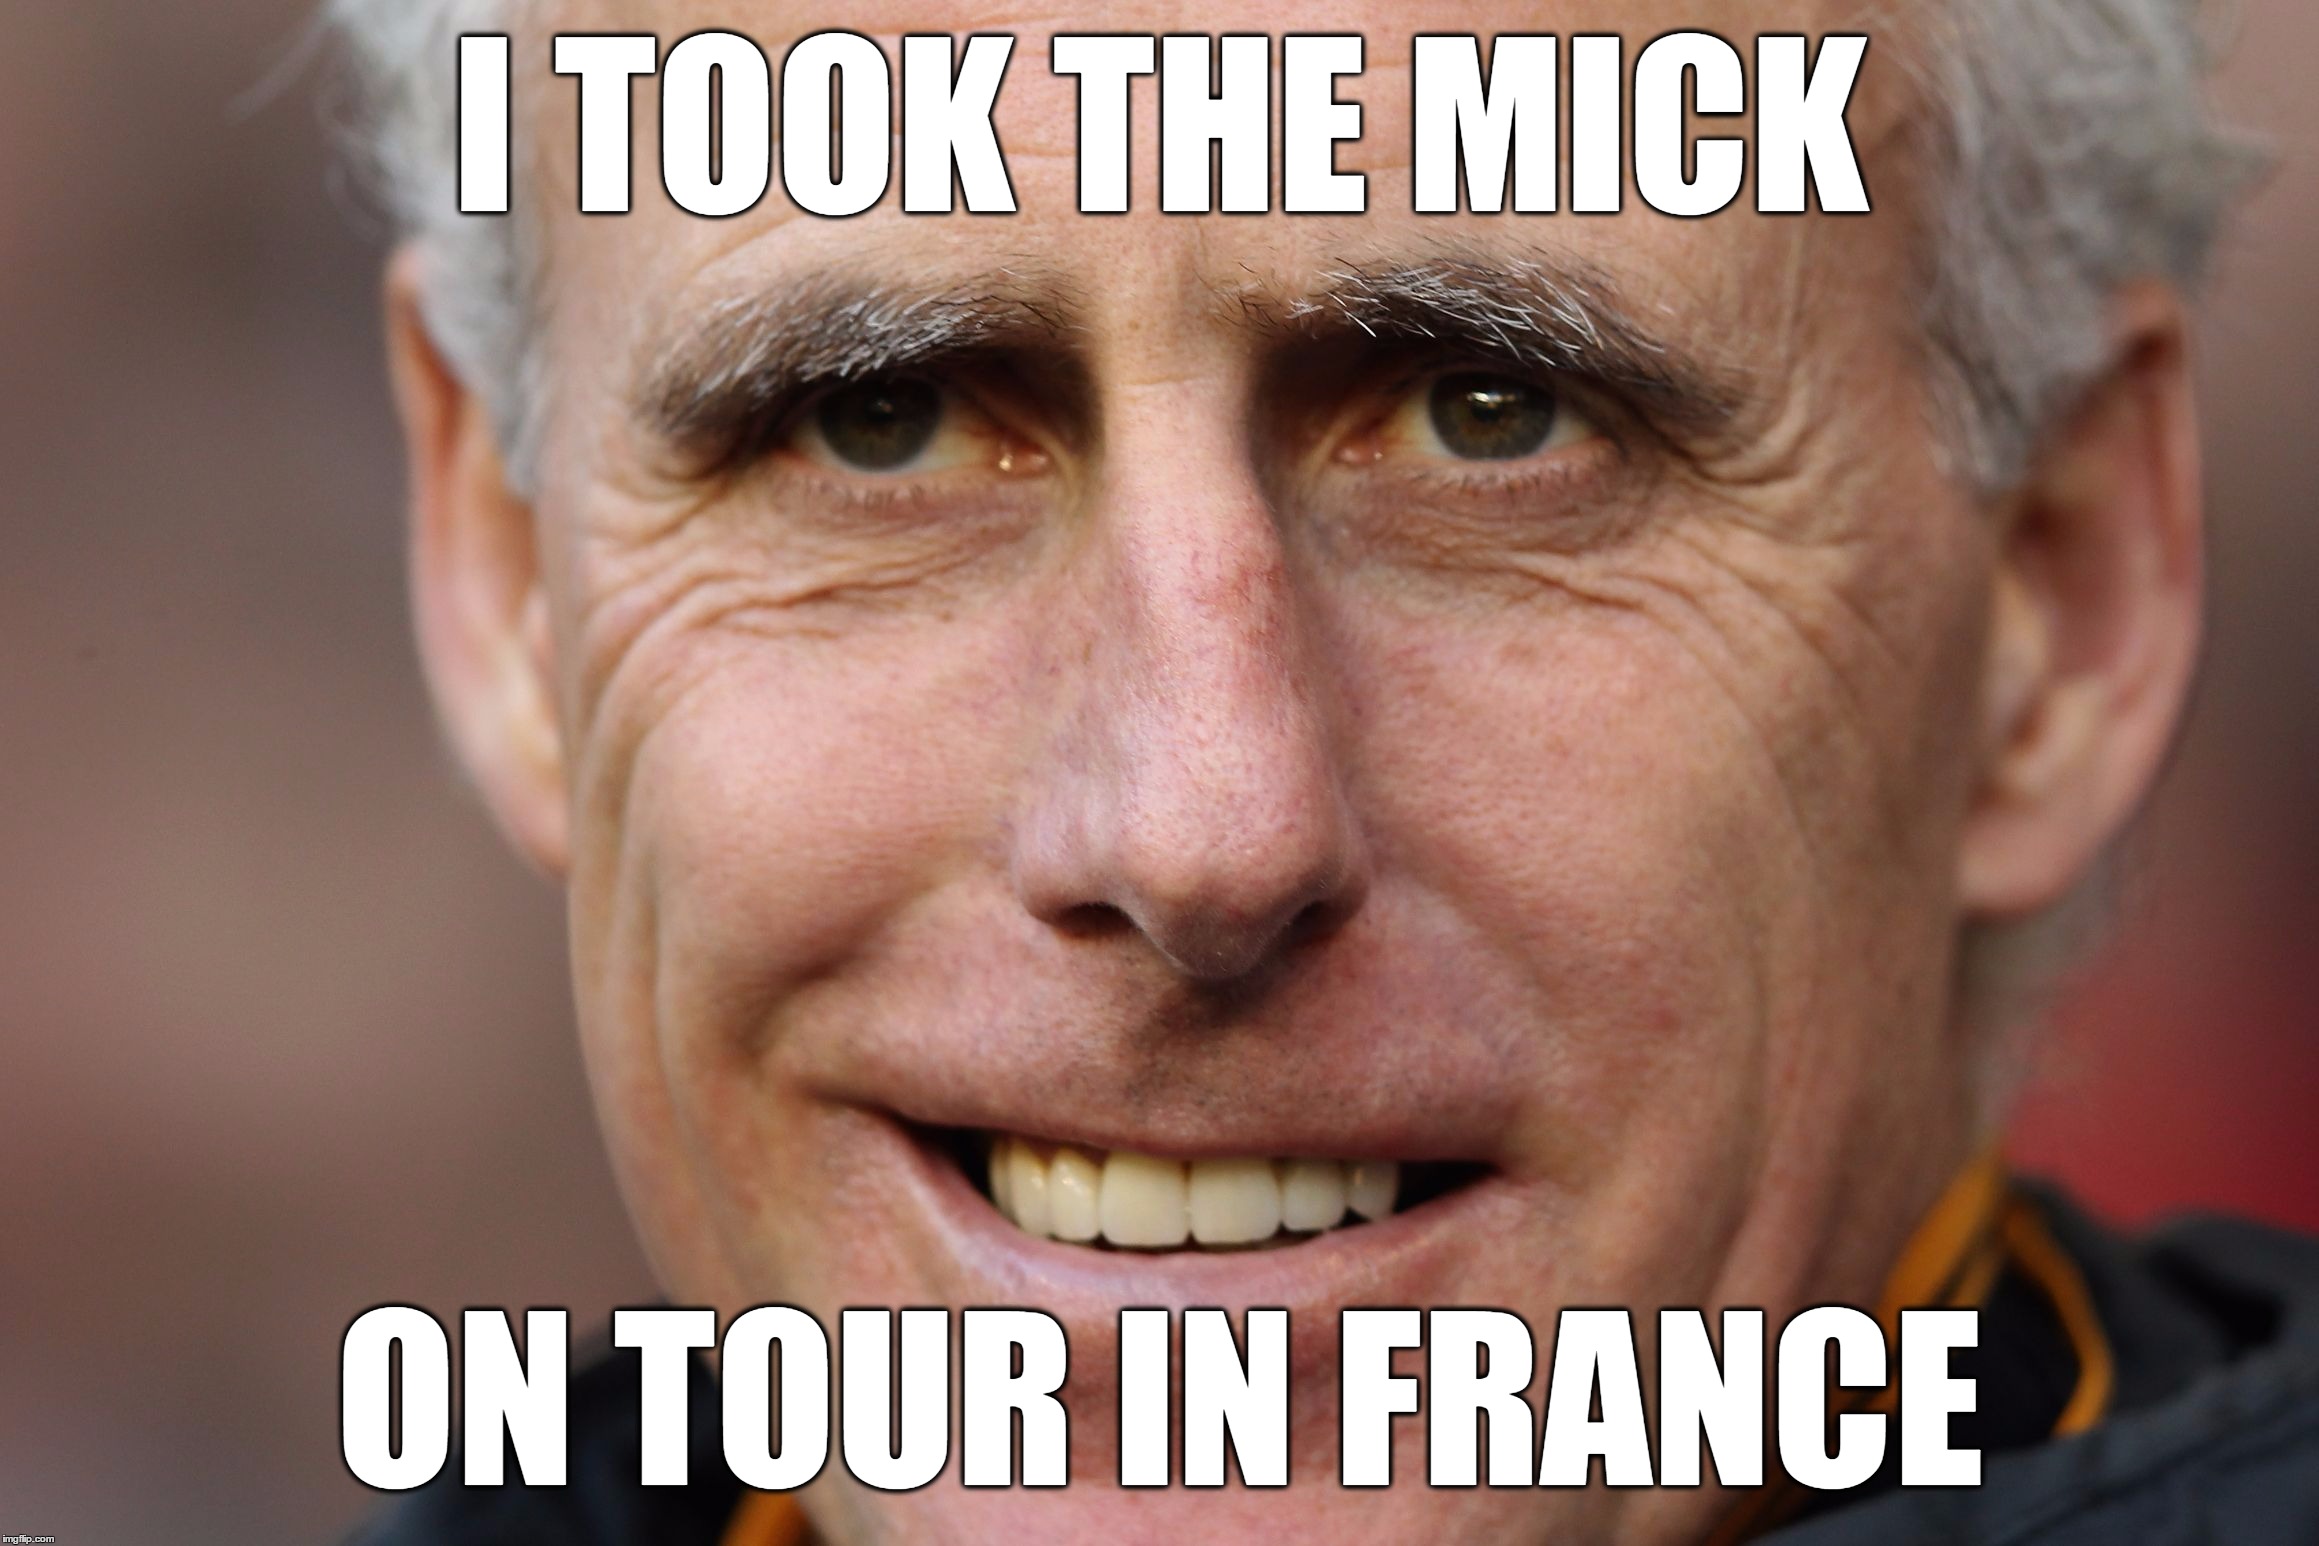  I TOOK THE MICK; ON TOUR IN FRANCE | image tagged in mm | made w/ Imgflip meme maker